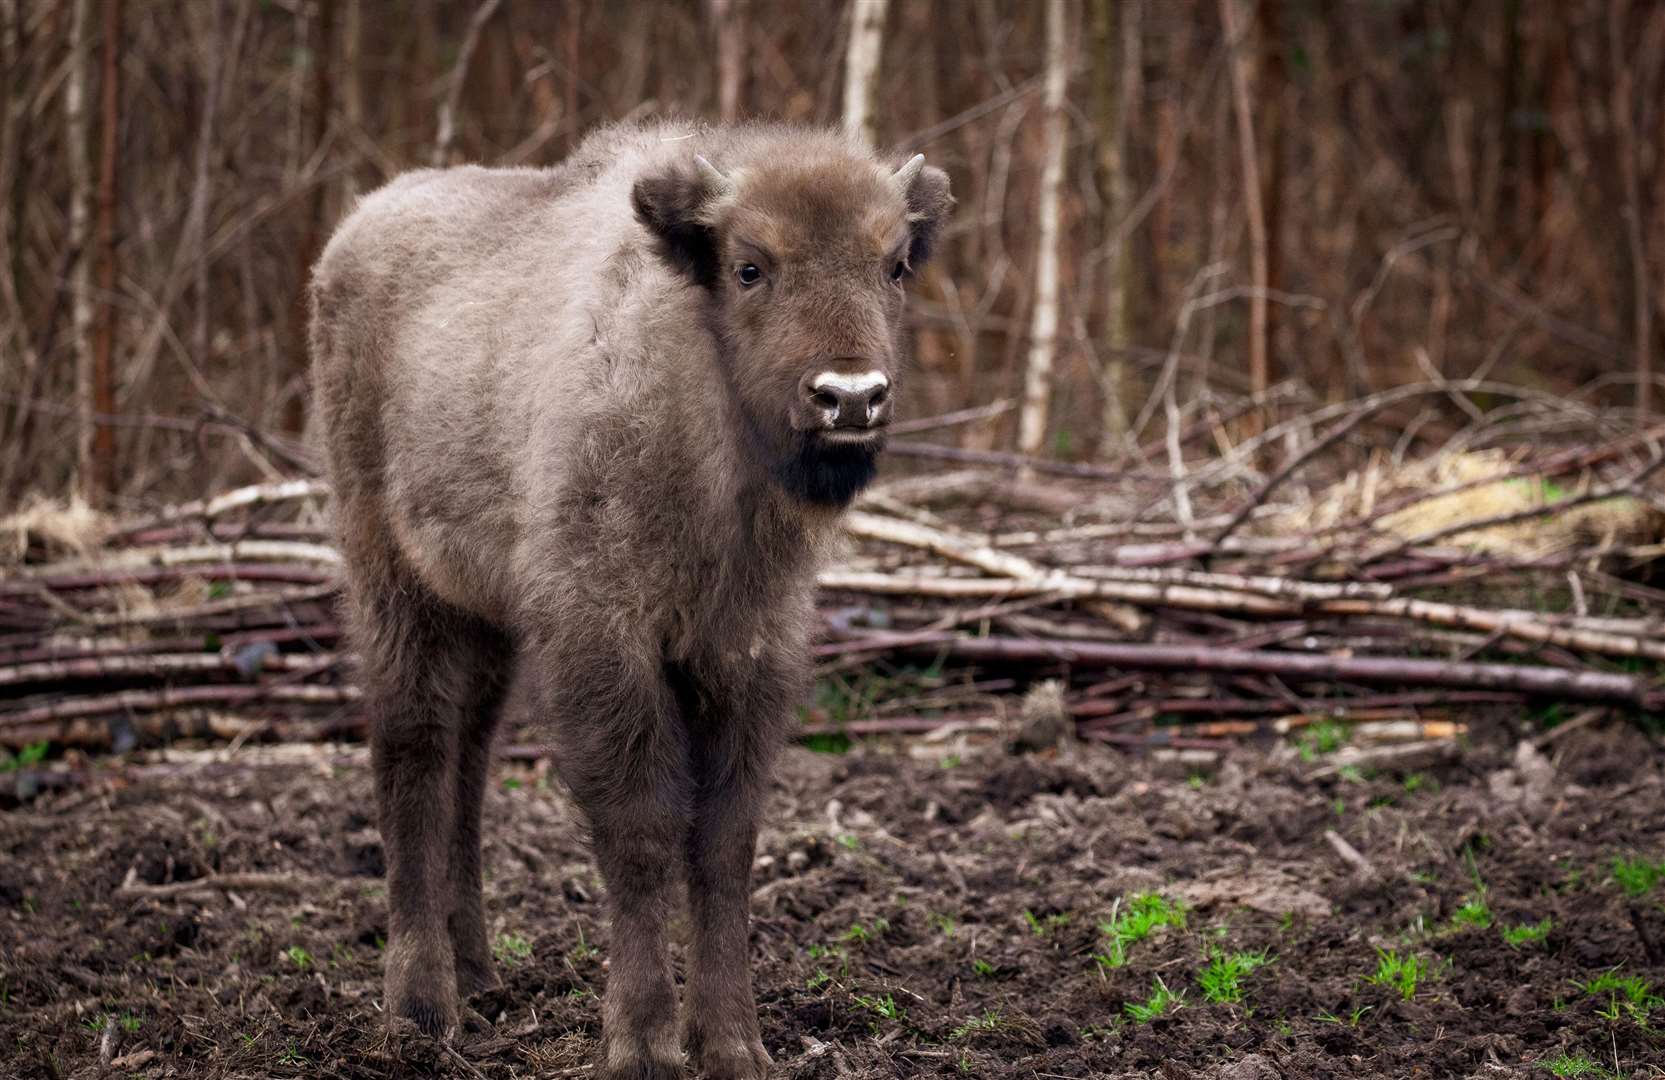 The bison born last October was the first wild one to be born in Britain for centuries